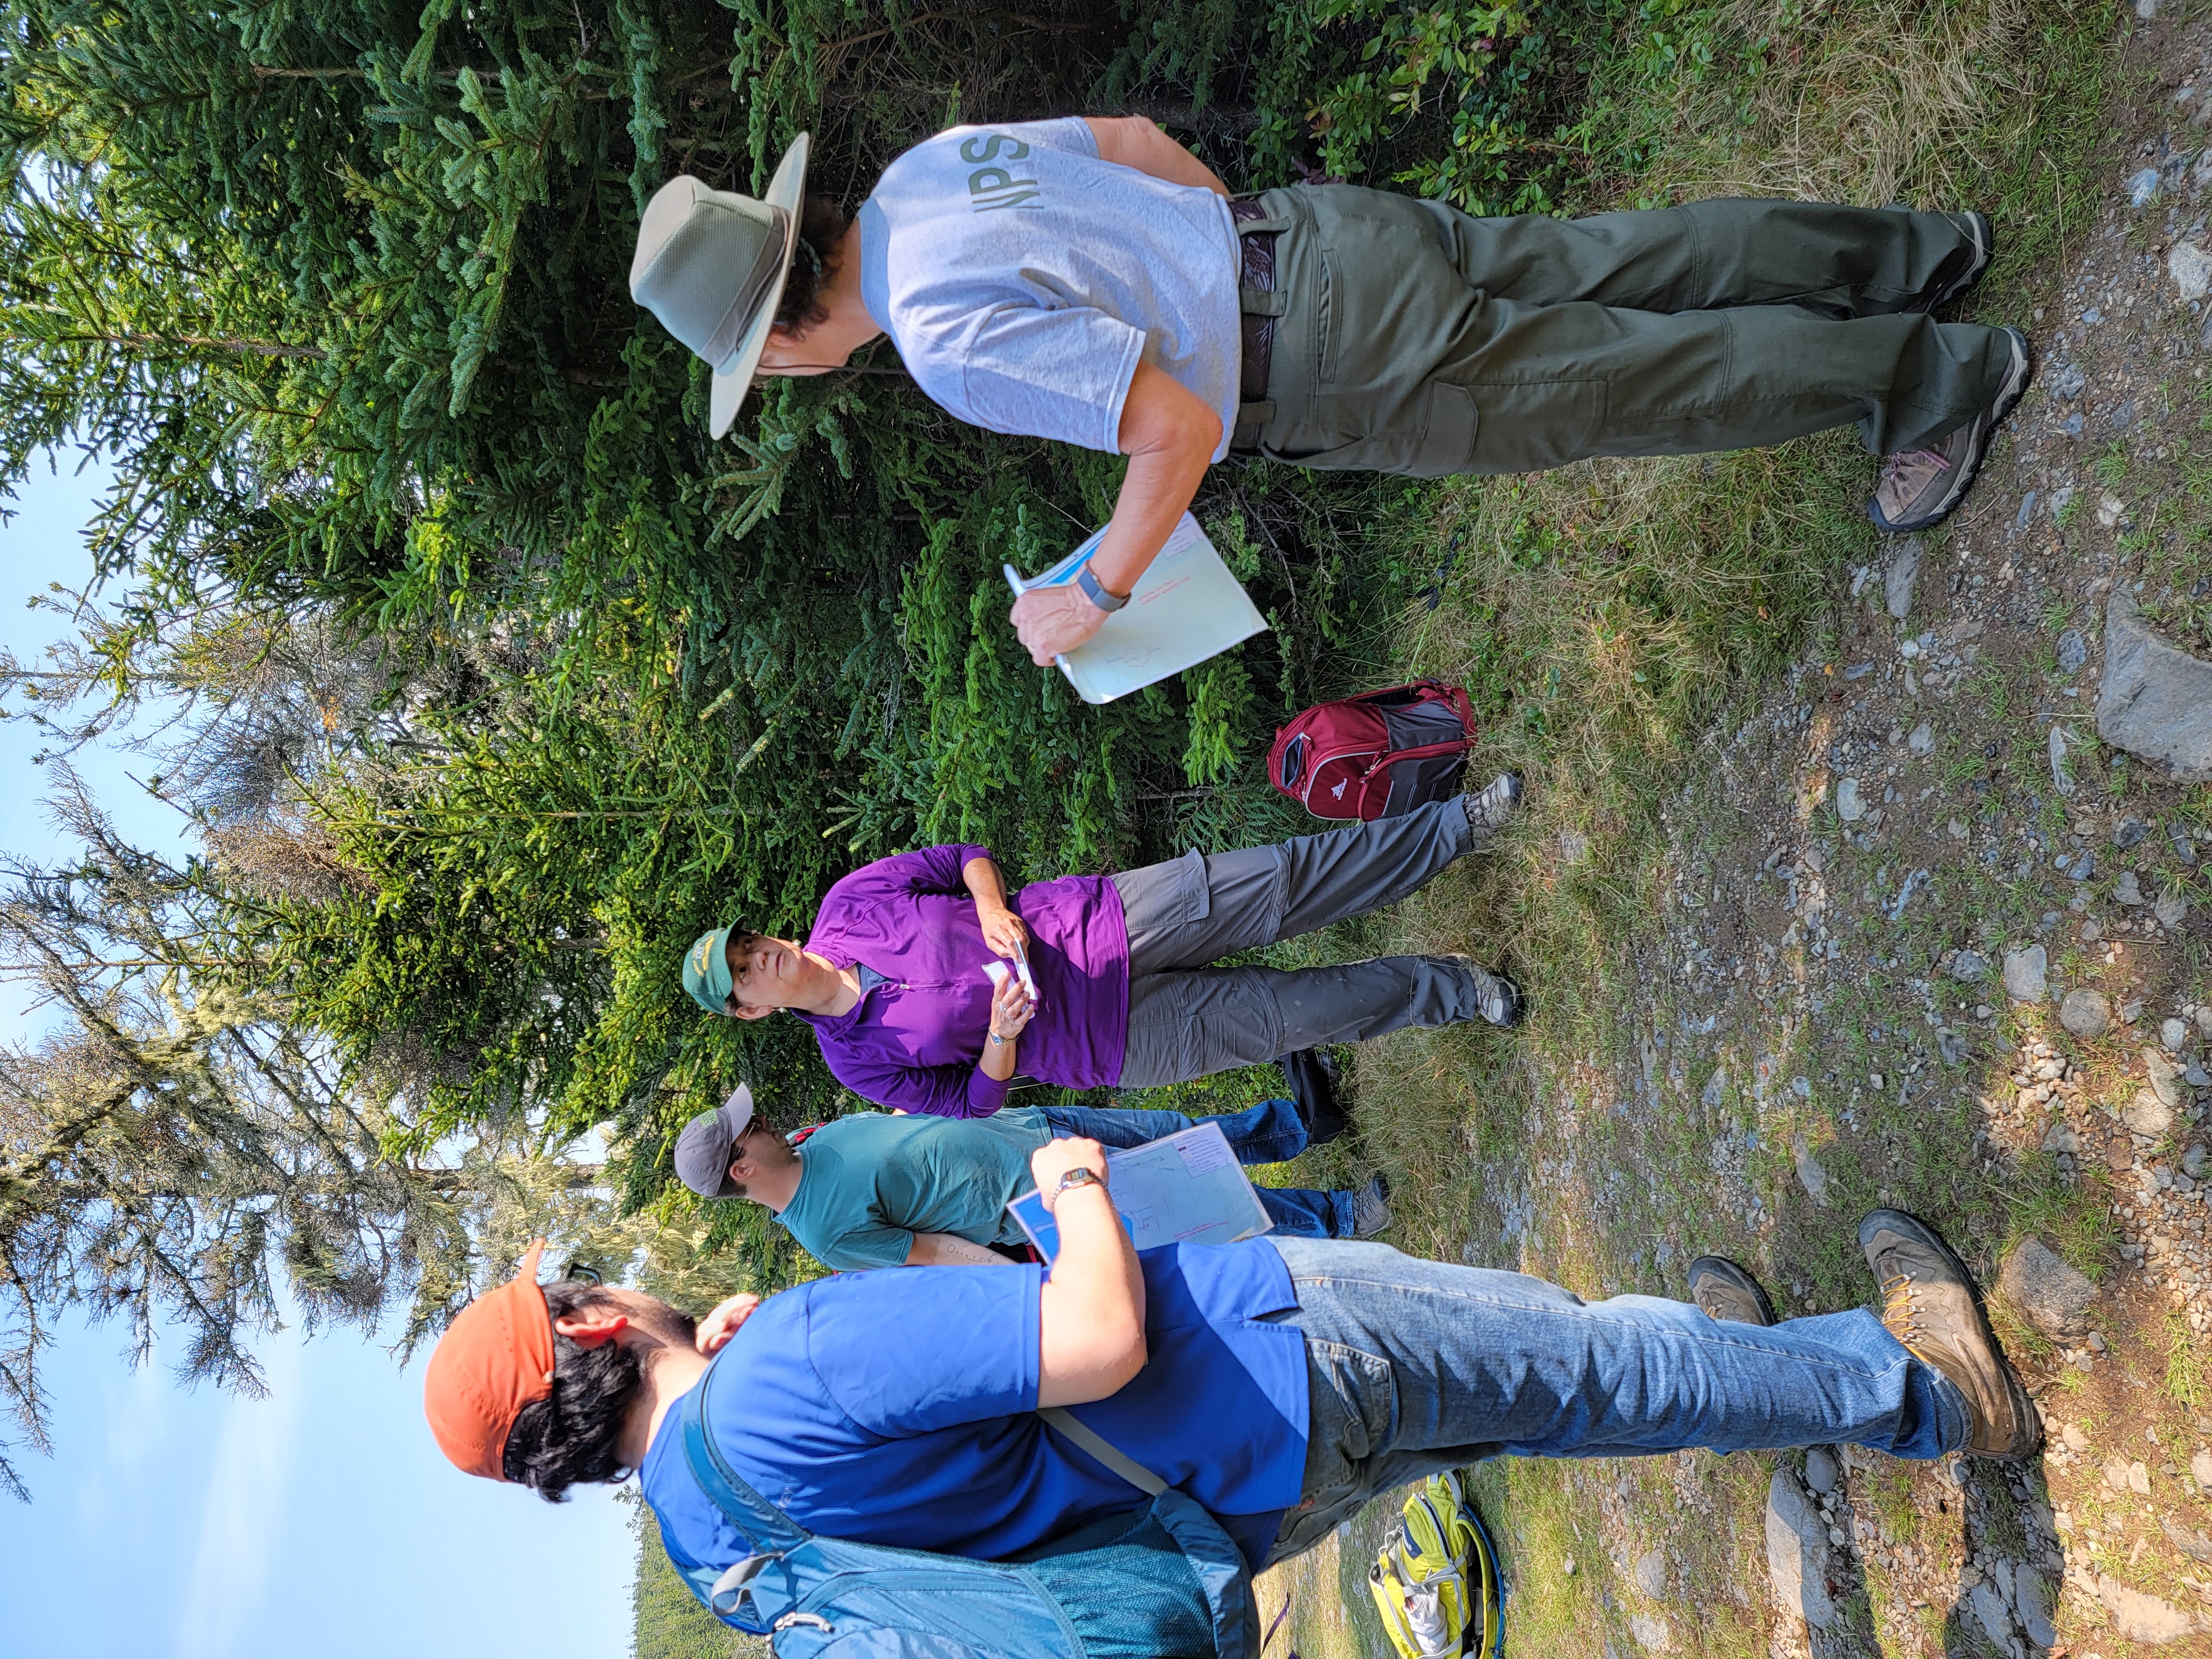 Individuals talking with NPS staff in a wooded coastal area